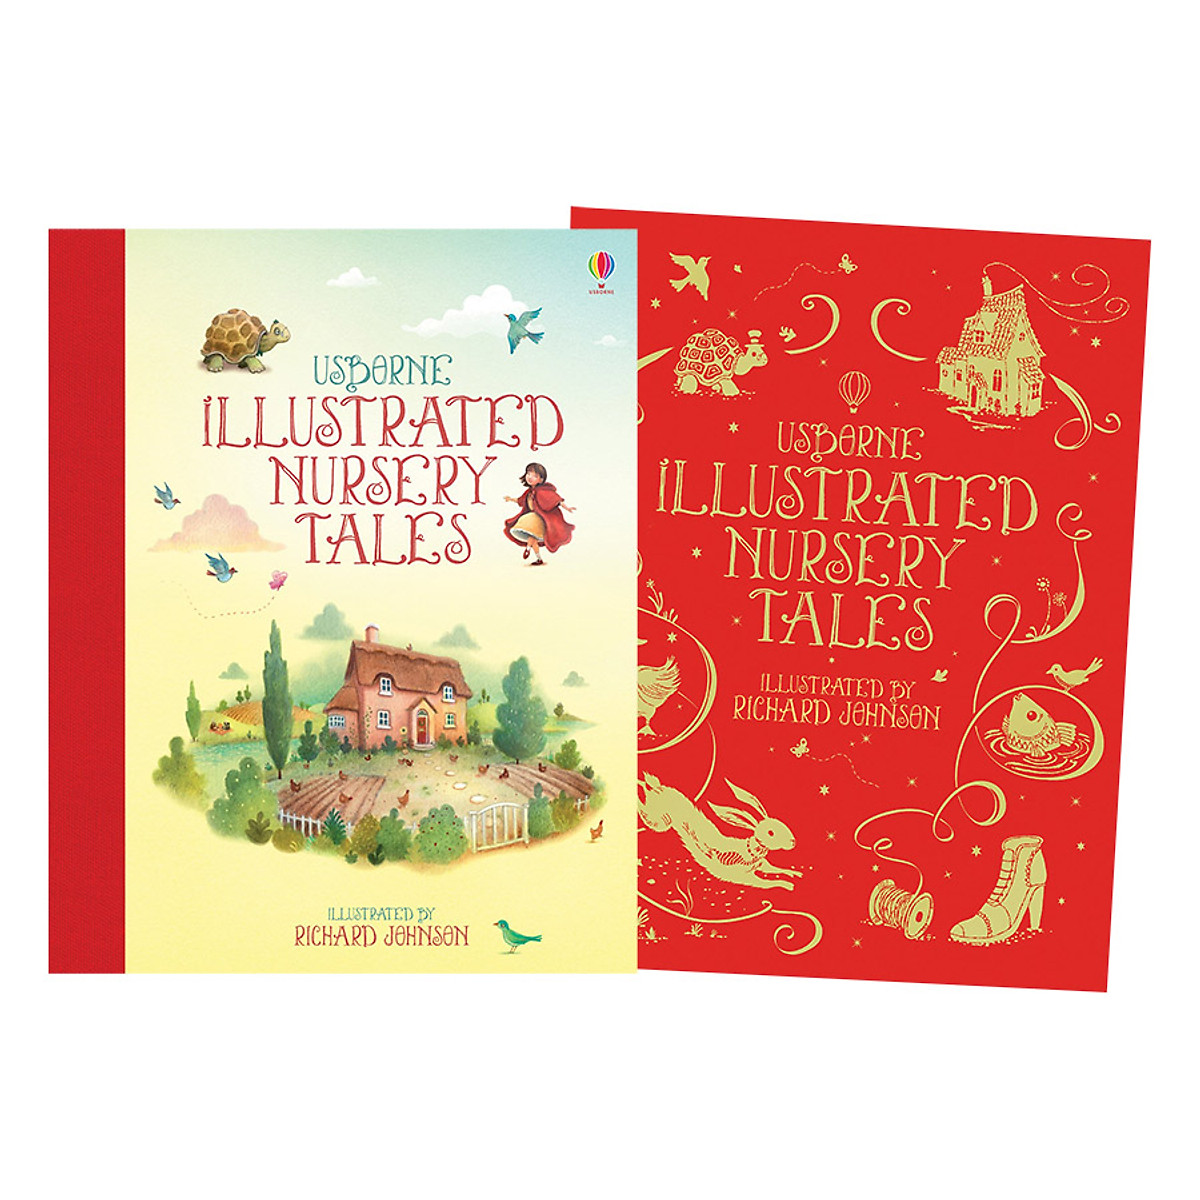 Sách tiếng Anh - Usborne Illustrated Nursery Tales